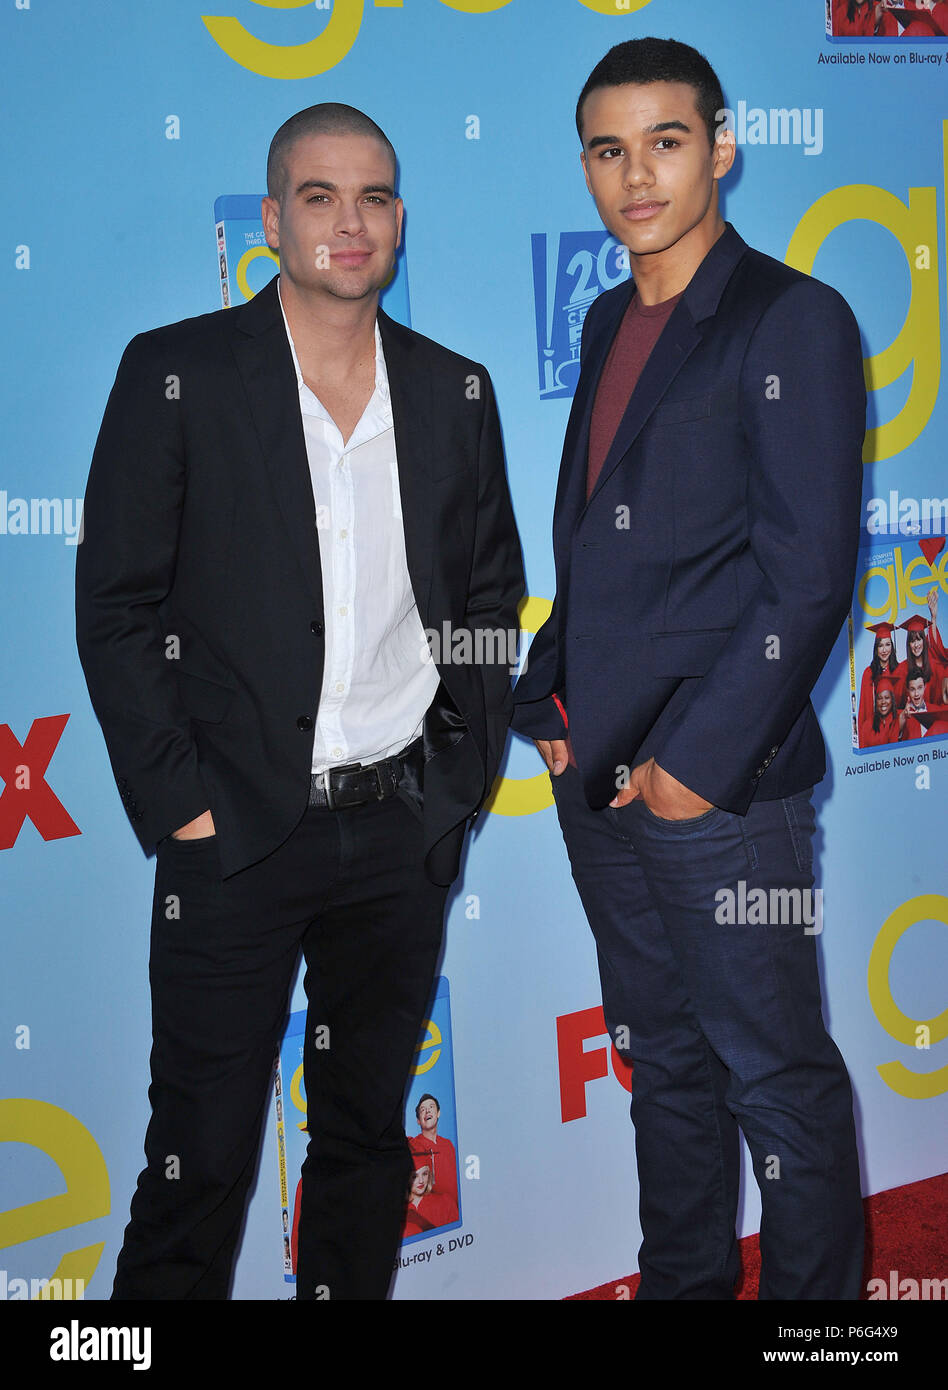 Mark Salling,  Jacob Artist  at the GLEE Premiere on the Paramount Lot in Los Angeles.Mark Salling,  Jacob Artist   Event in Hollywood Life - California, Red Carpet Event, USA, Film Industry, Celebrities, Photography, Bestof, Arts Culture and Entertainment, Topix Celebrities fashion, Best of, Hollywood Life, Event in Hollywood Life - California, Red Carpet and backstage, ,Arts Culture and Entertainment, Photography,    inquiry tsuni@Gamma-USA.com ,  Music celebrities, Musician, Music Group, 2012 Stock Photo